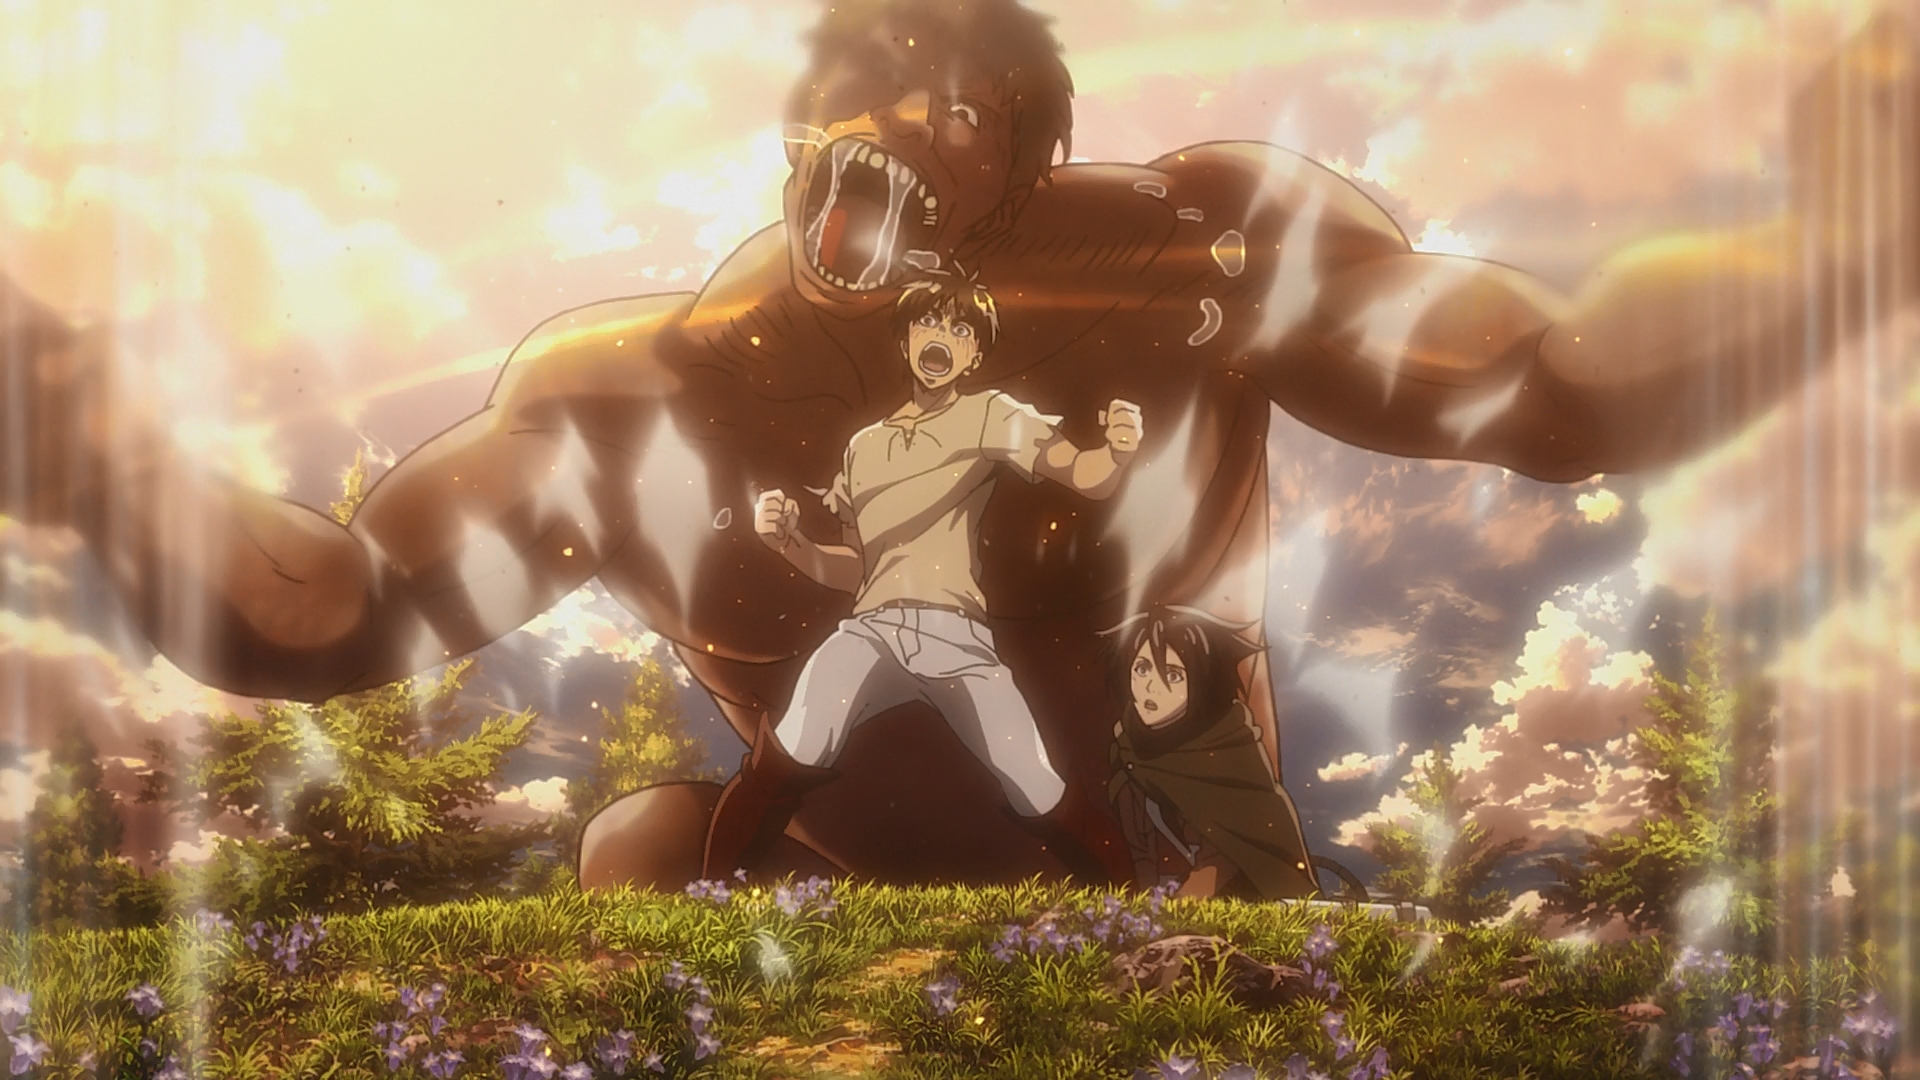 Why Is Eren Yeager Evil In Attack On Titan?